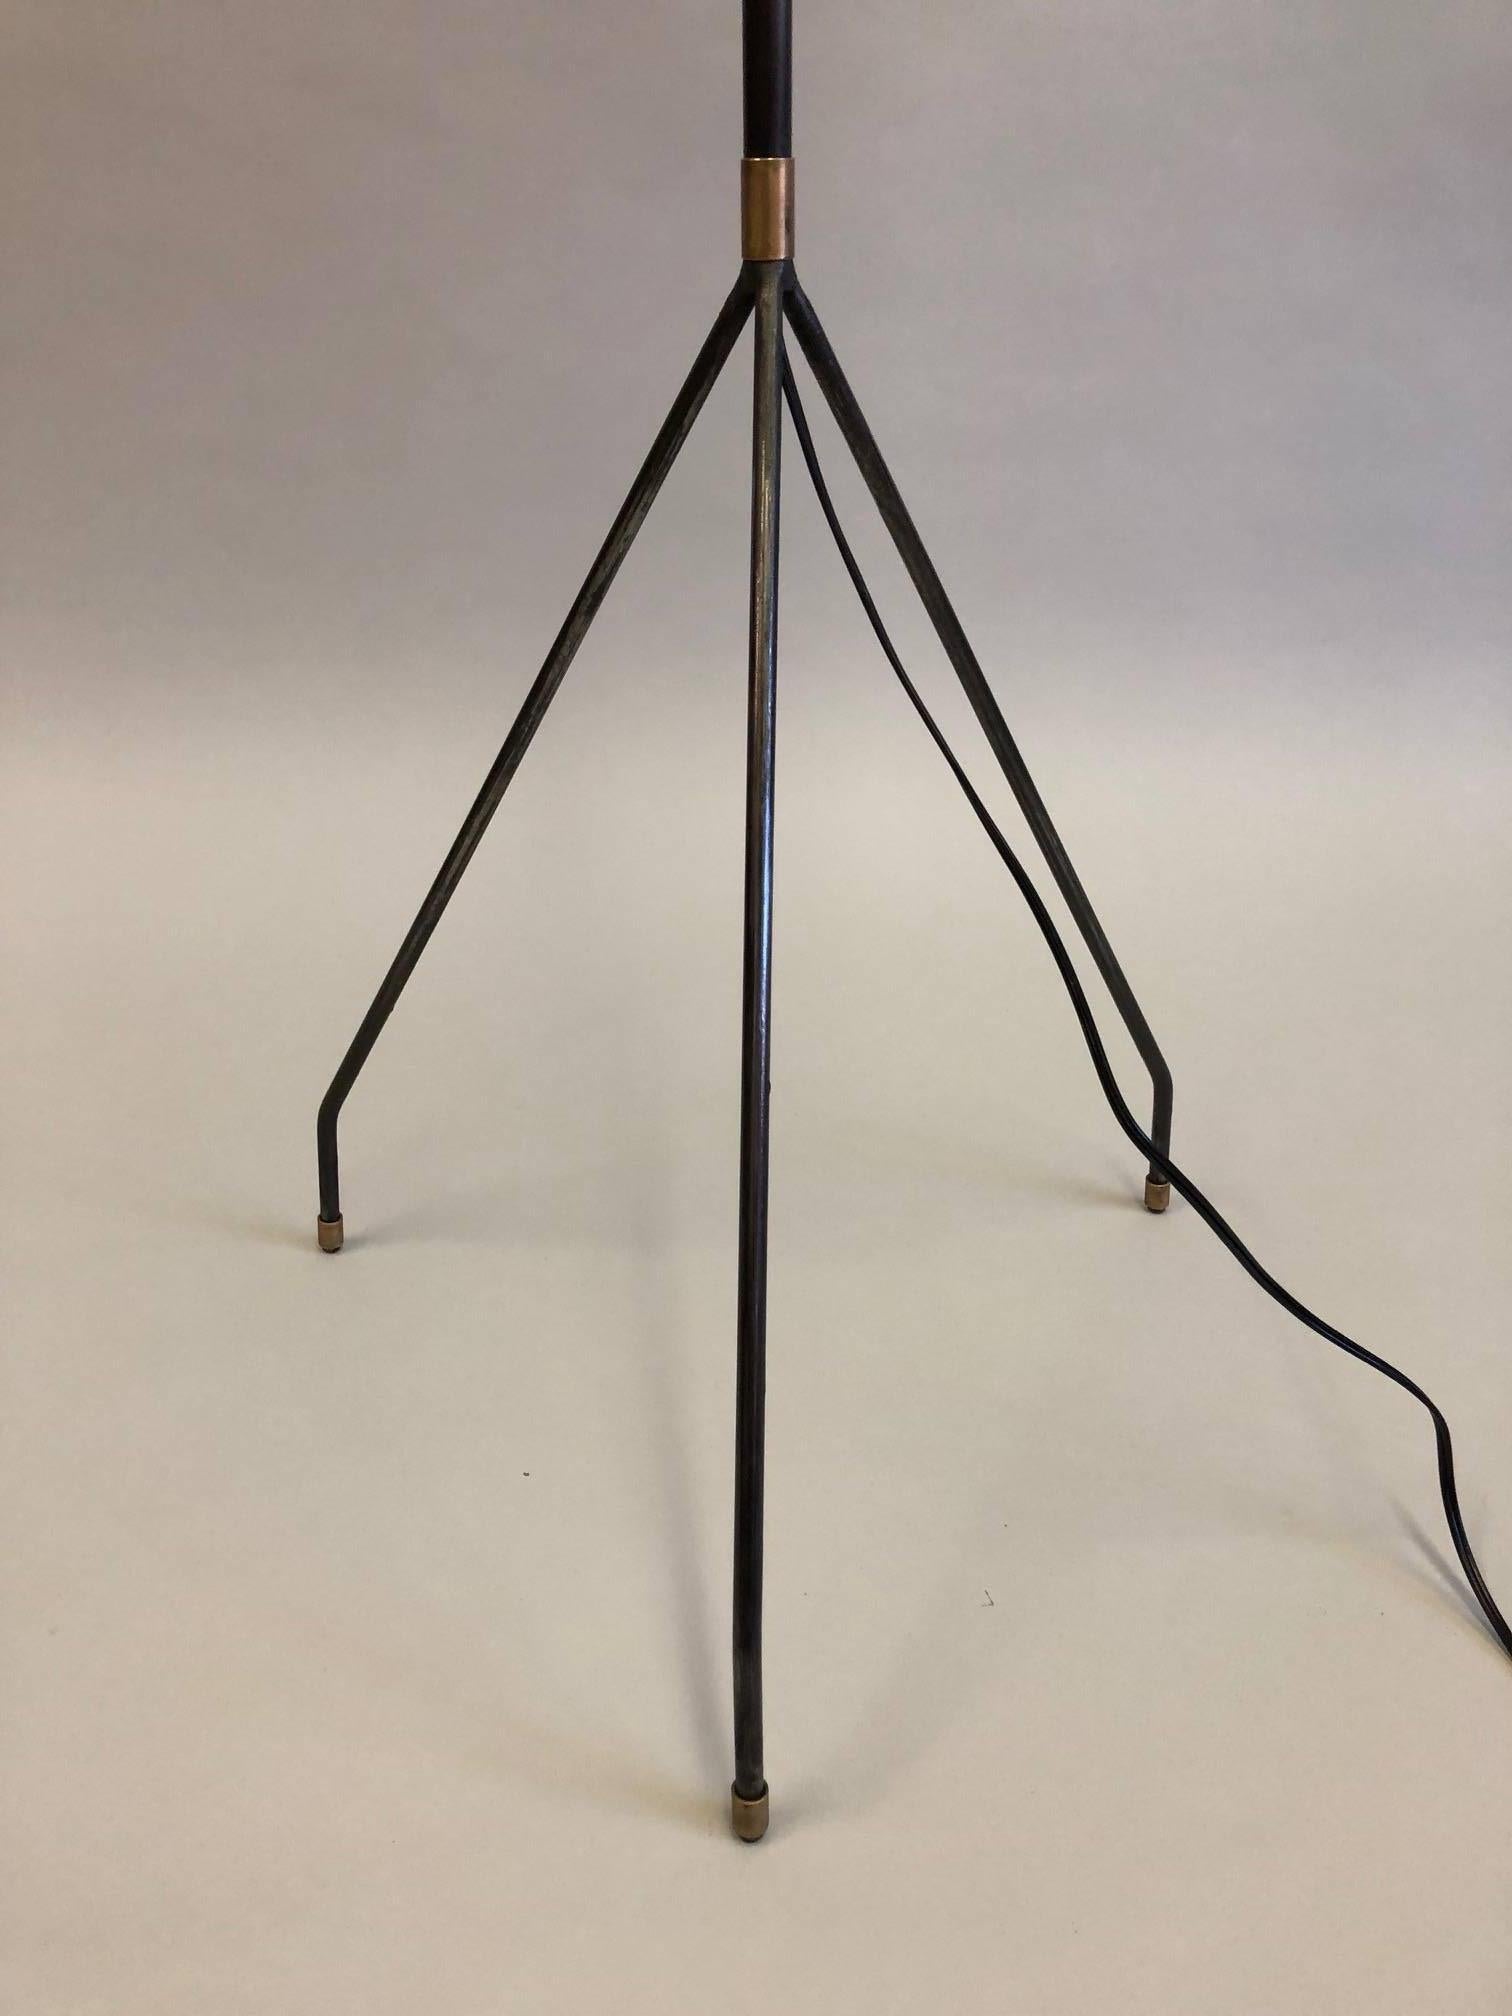 Pair of French Mid-Century Modern / Minimalist Iron Floor Lamps, Pierre Guariche For Sale 1